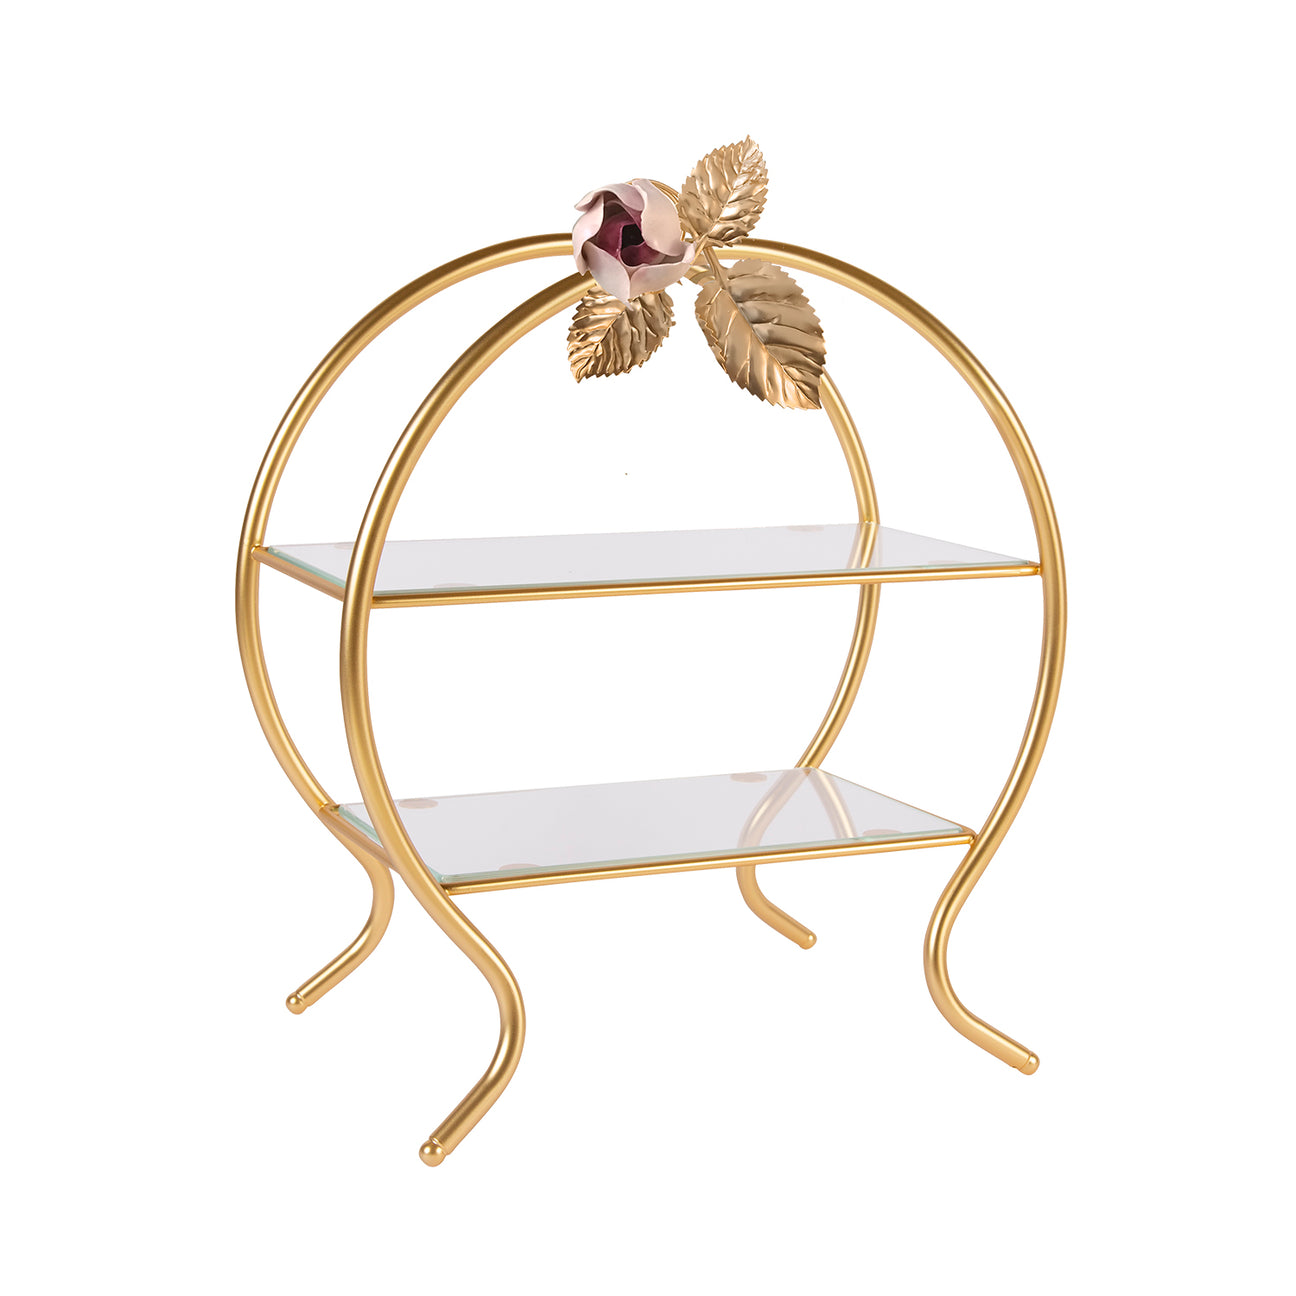 Tulip 2 Tier Pastry Stand - Gold 